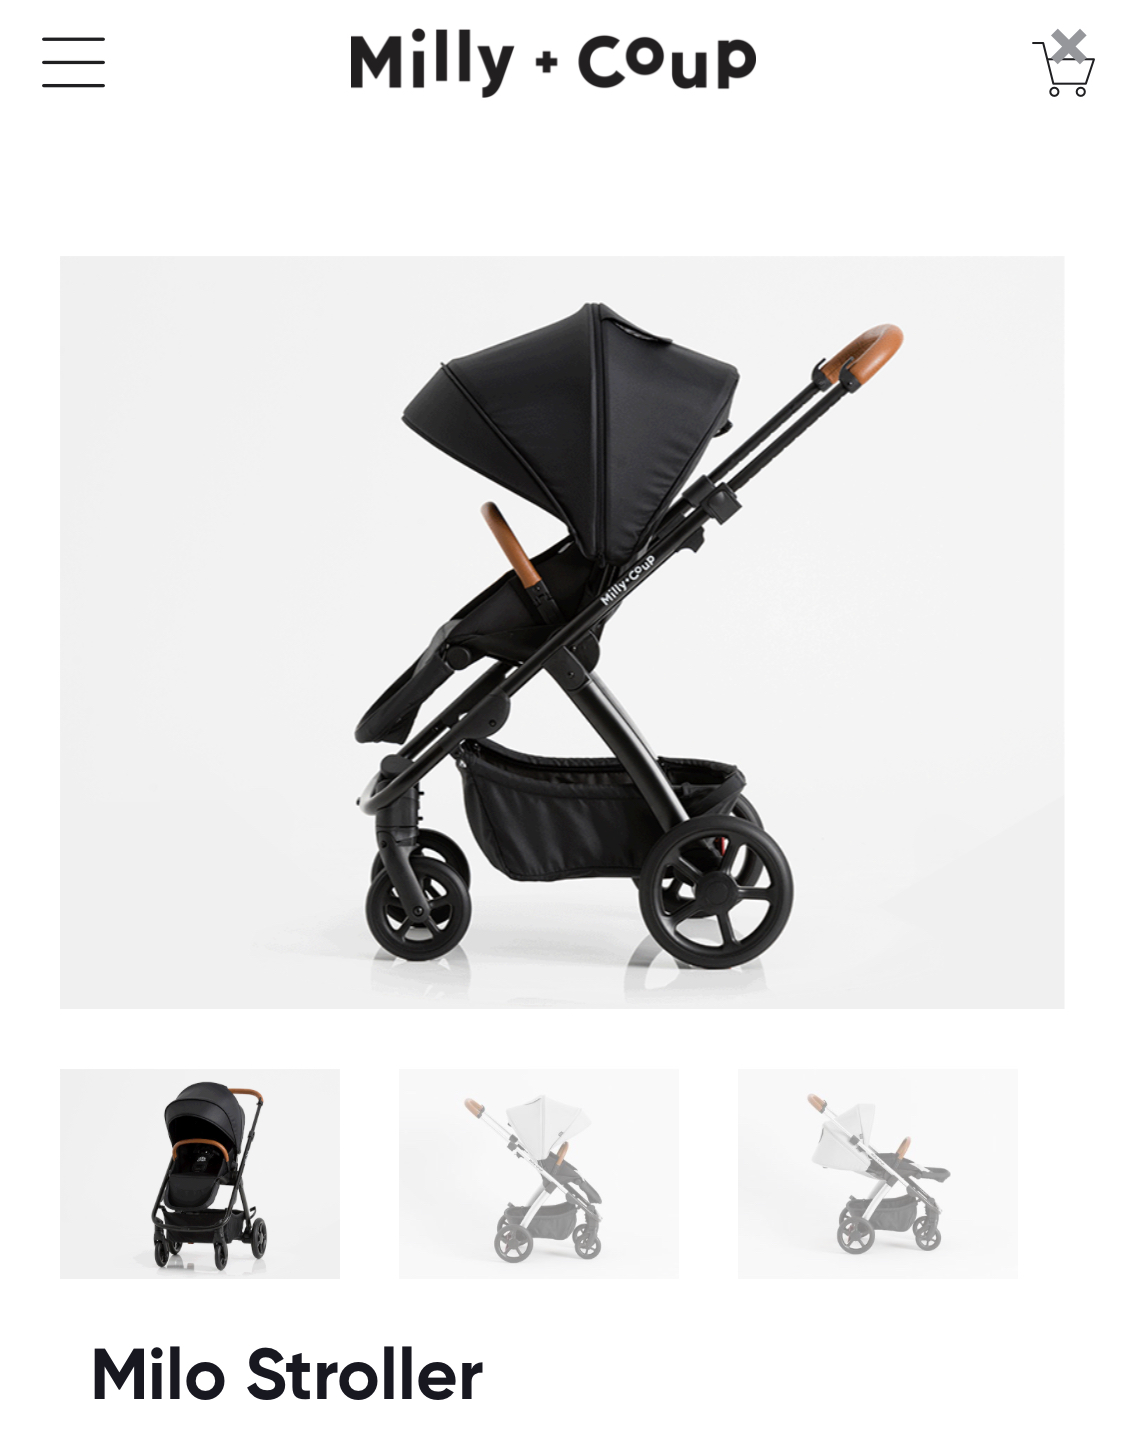 Milly + Coup Milo Stroller